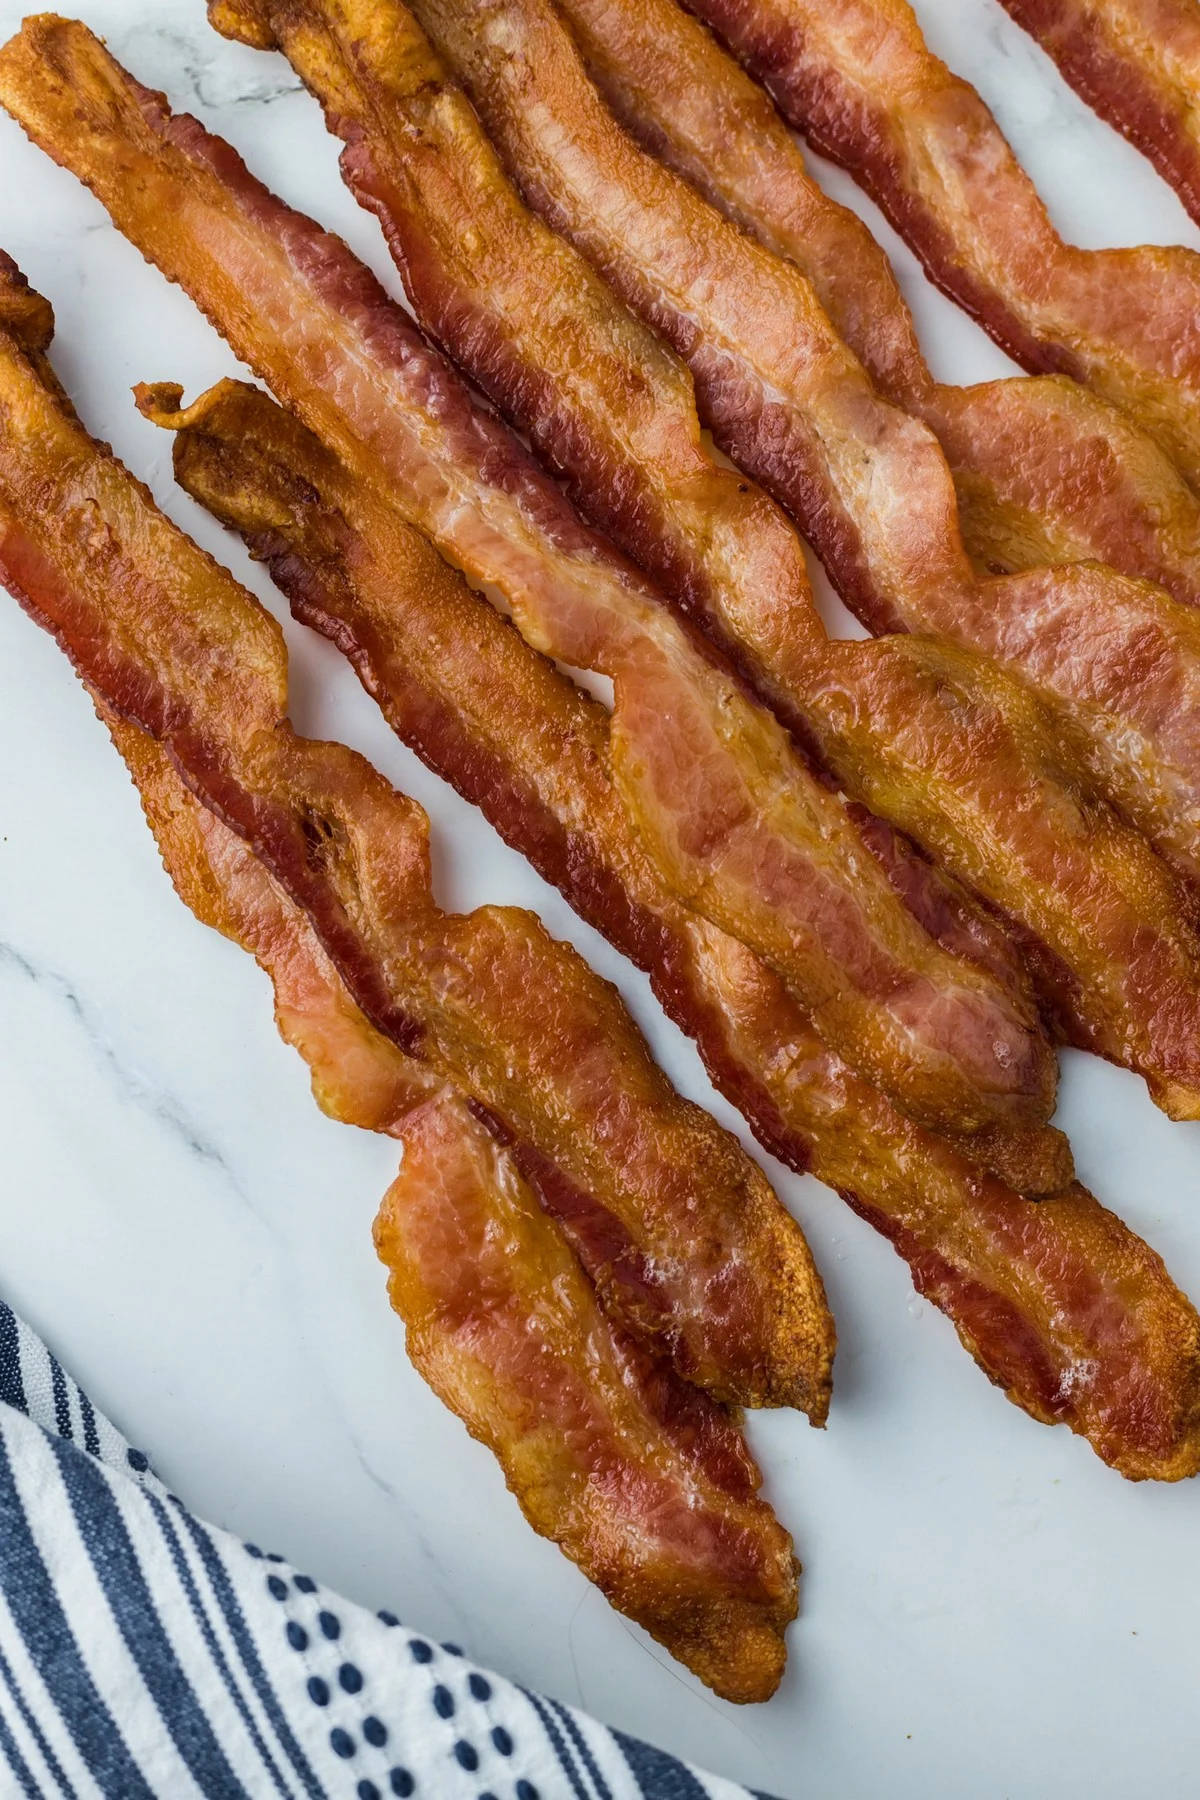 https://www.southerncravings.com/wp-content/uploads/2020/04/Oven-Baked-Bacon-3.jpg.webp